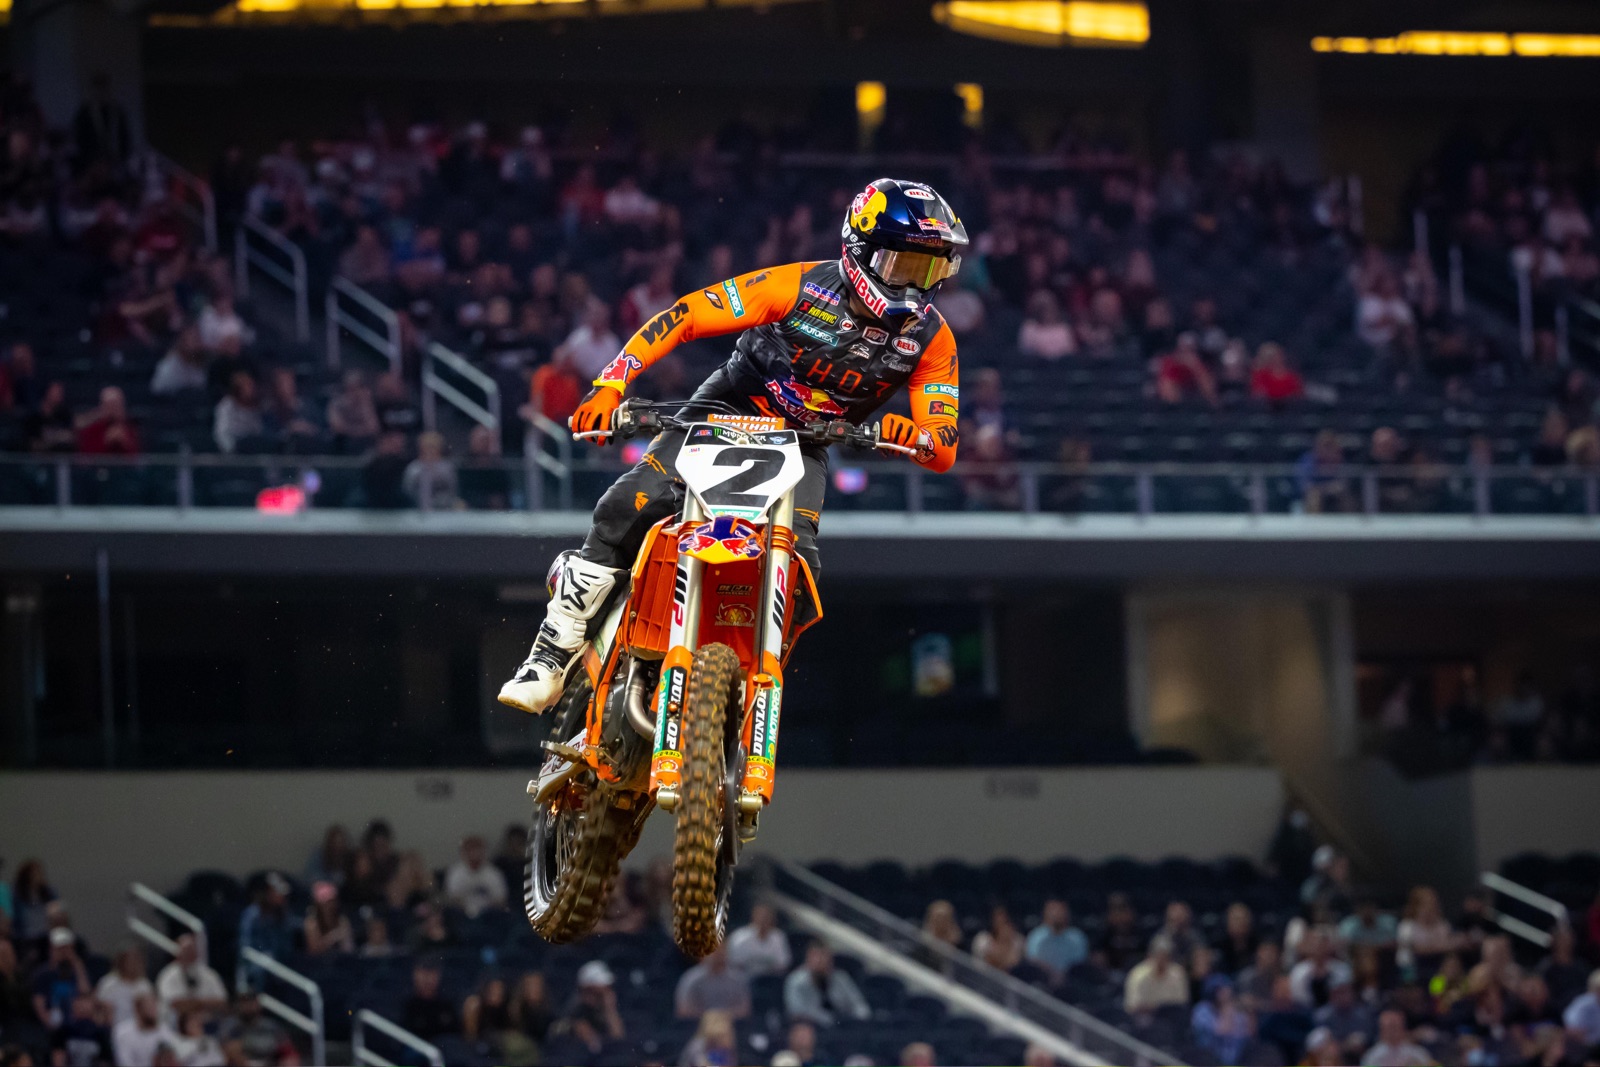 Cooper Webb returned to the top of the podium